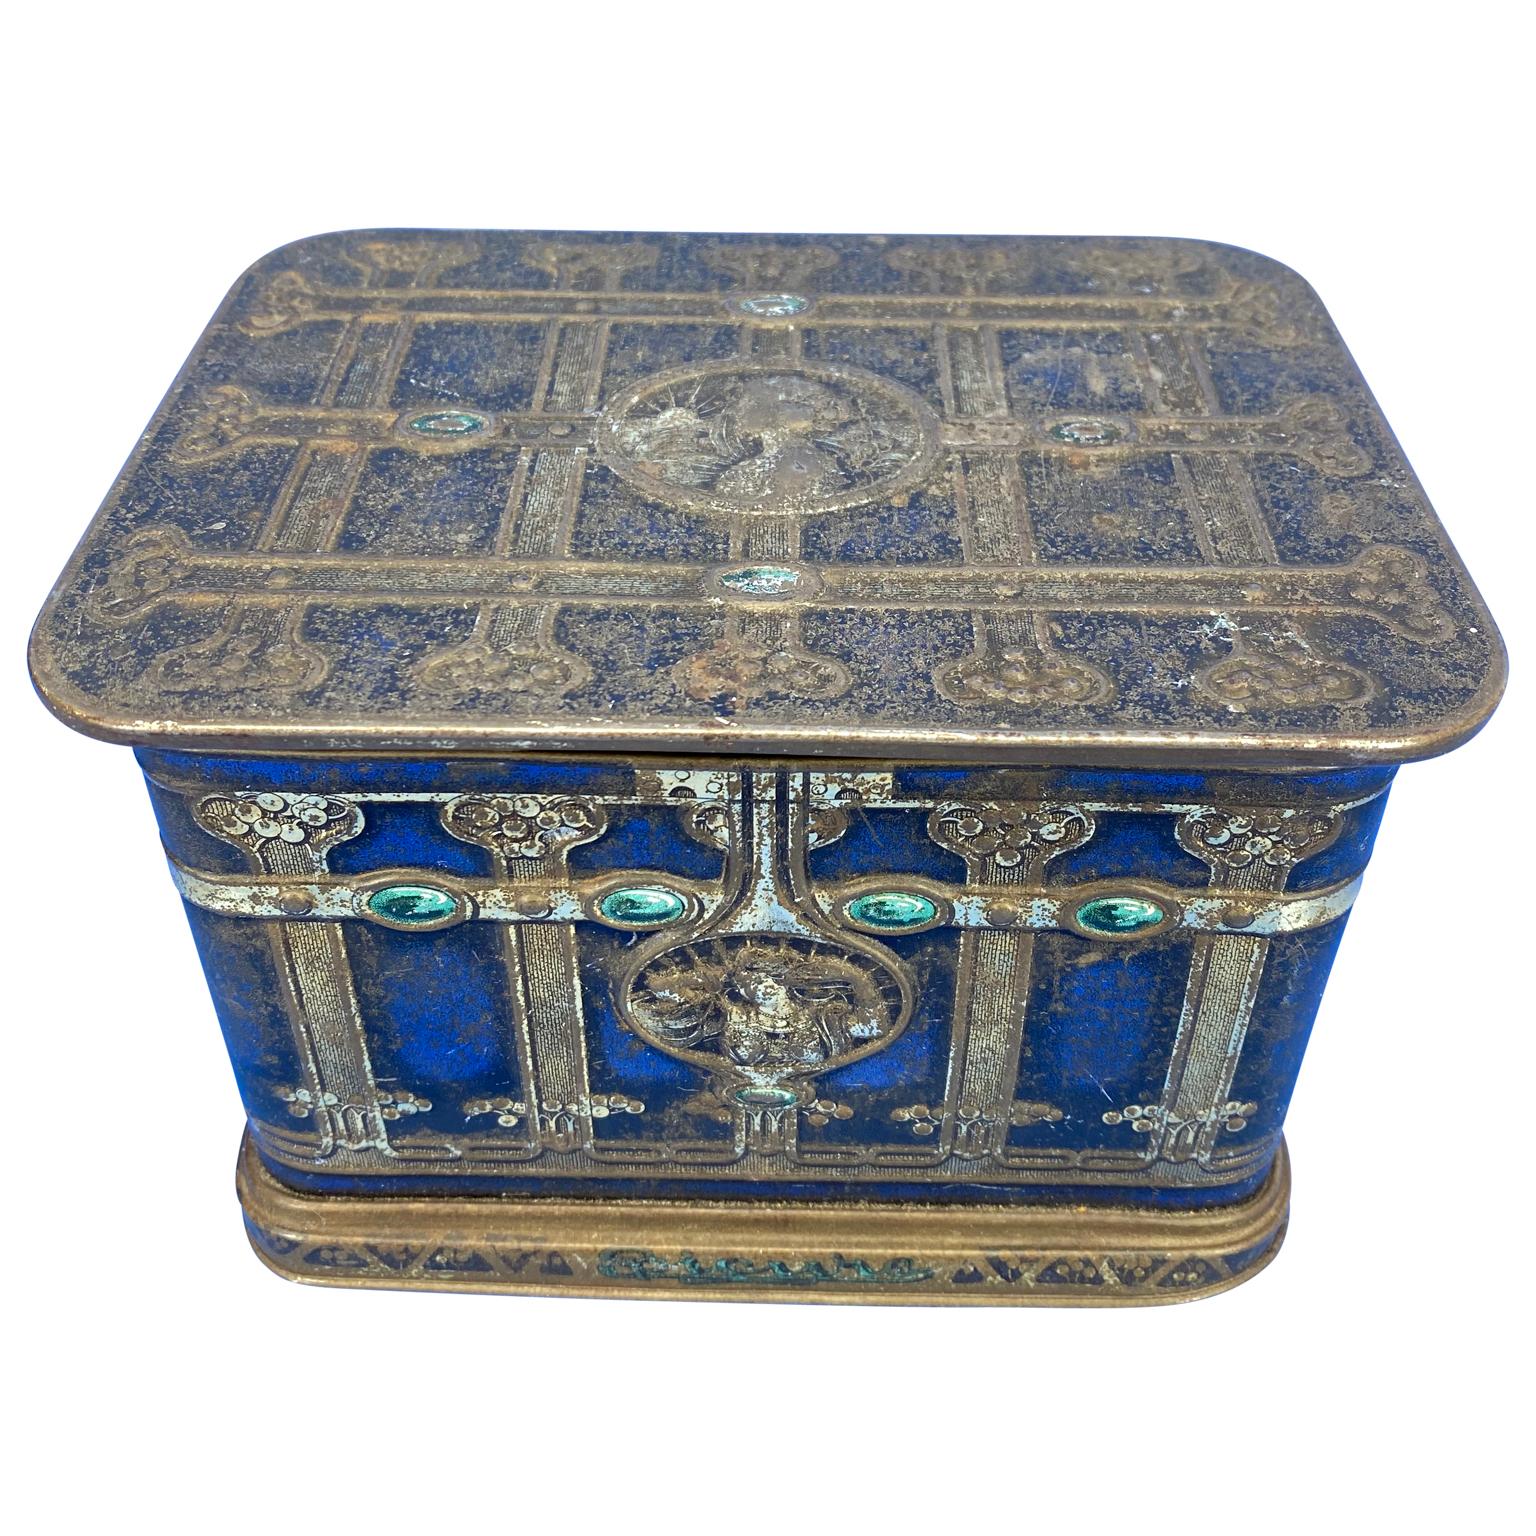 Early blue American Toleware tobacco or jewelry box.

             